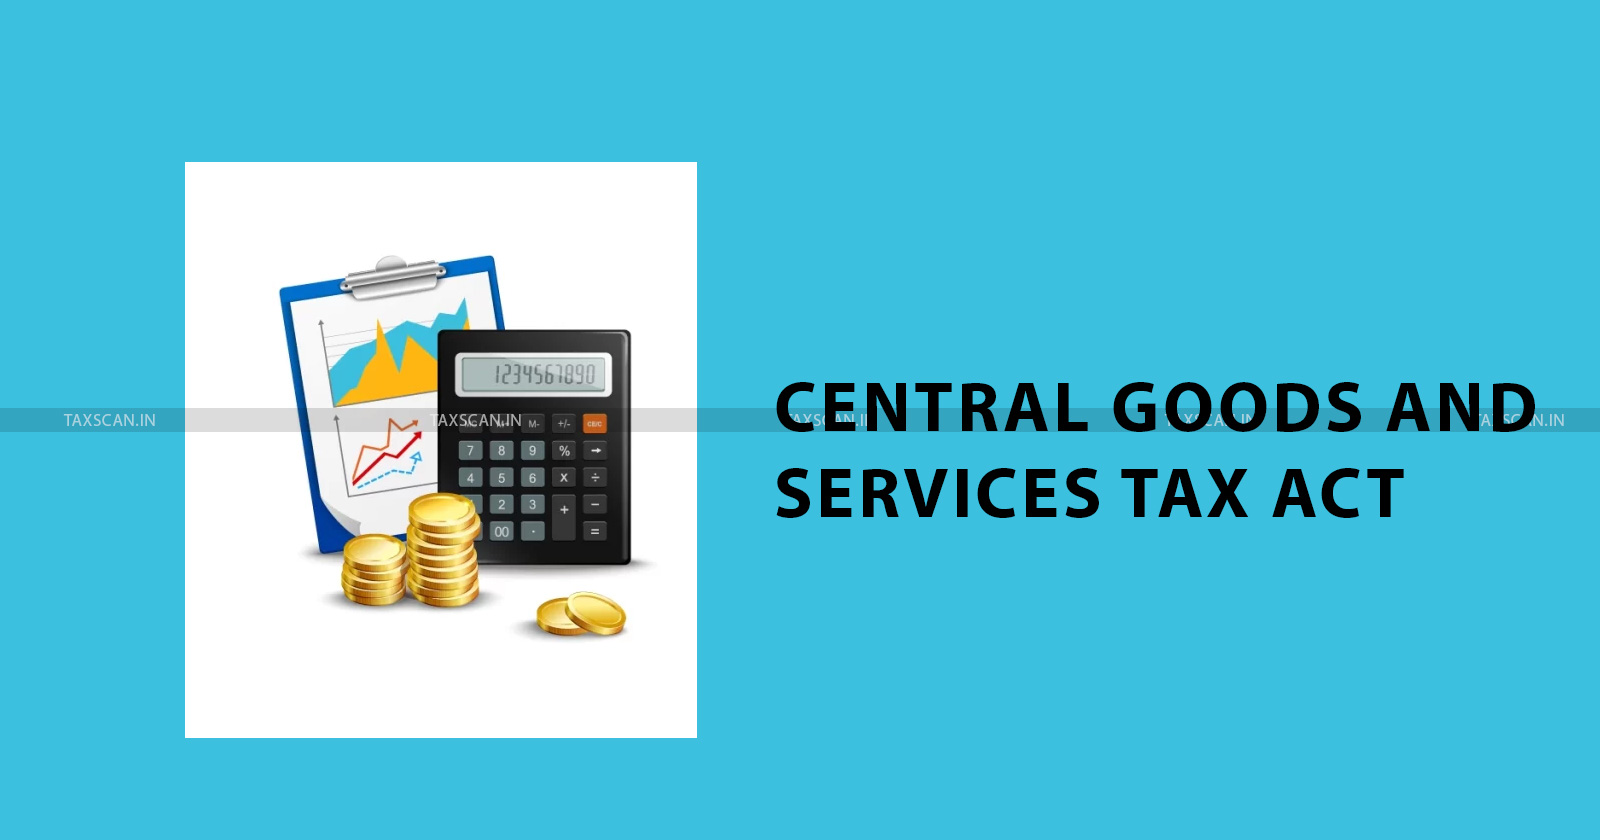 ITC -CGST - Assessee - CGST Act - Central Goods and Service Tax - Input Tax Credit - Tax Credit - taxscan